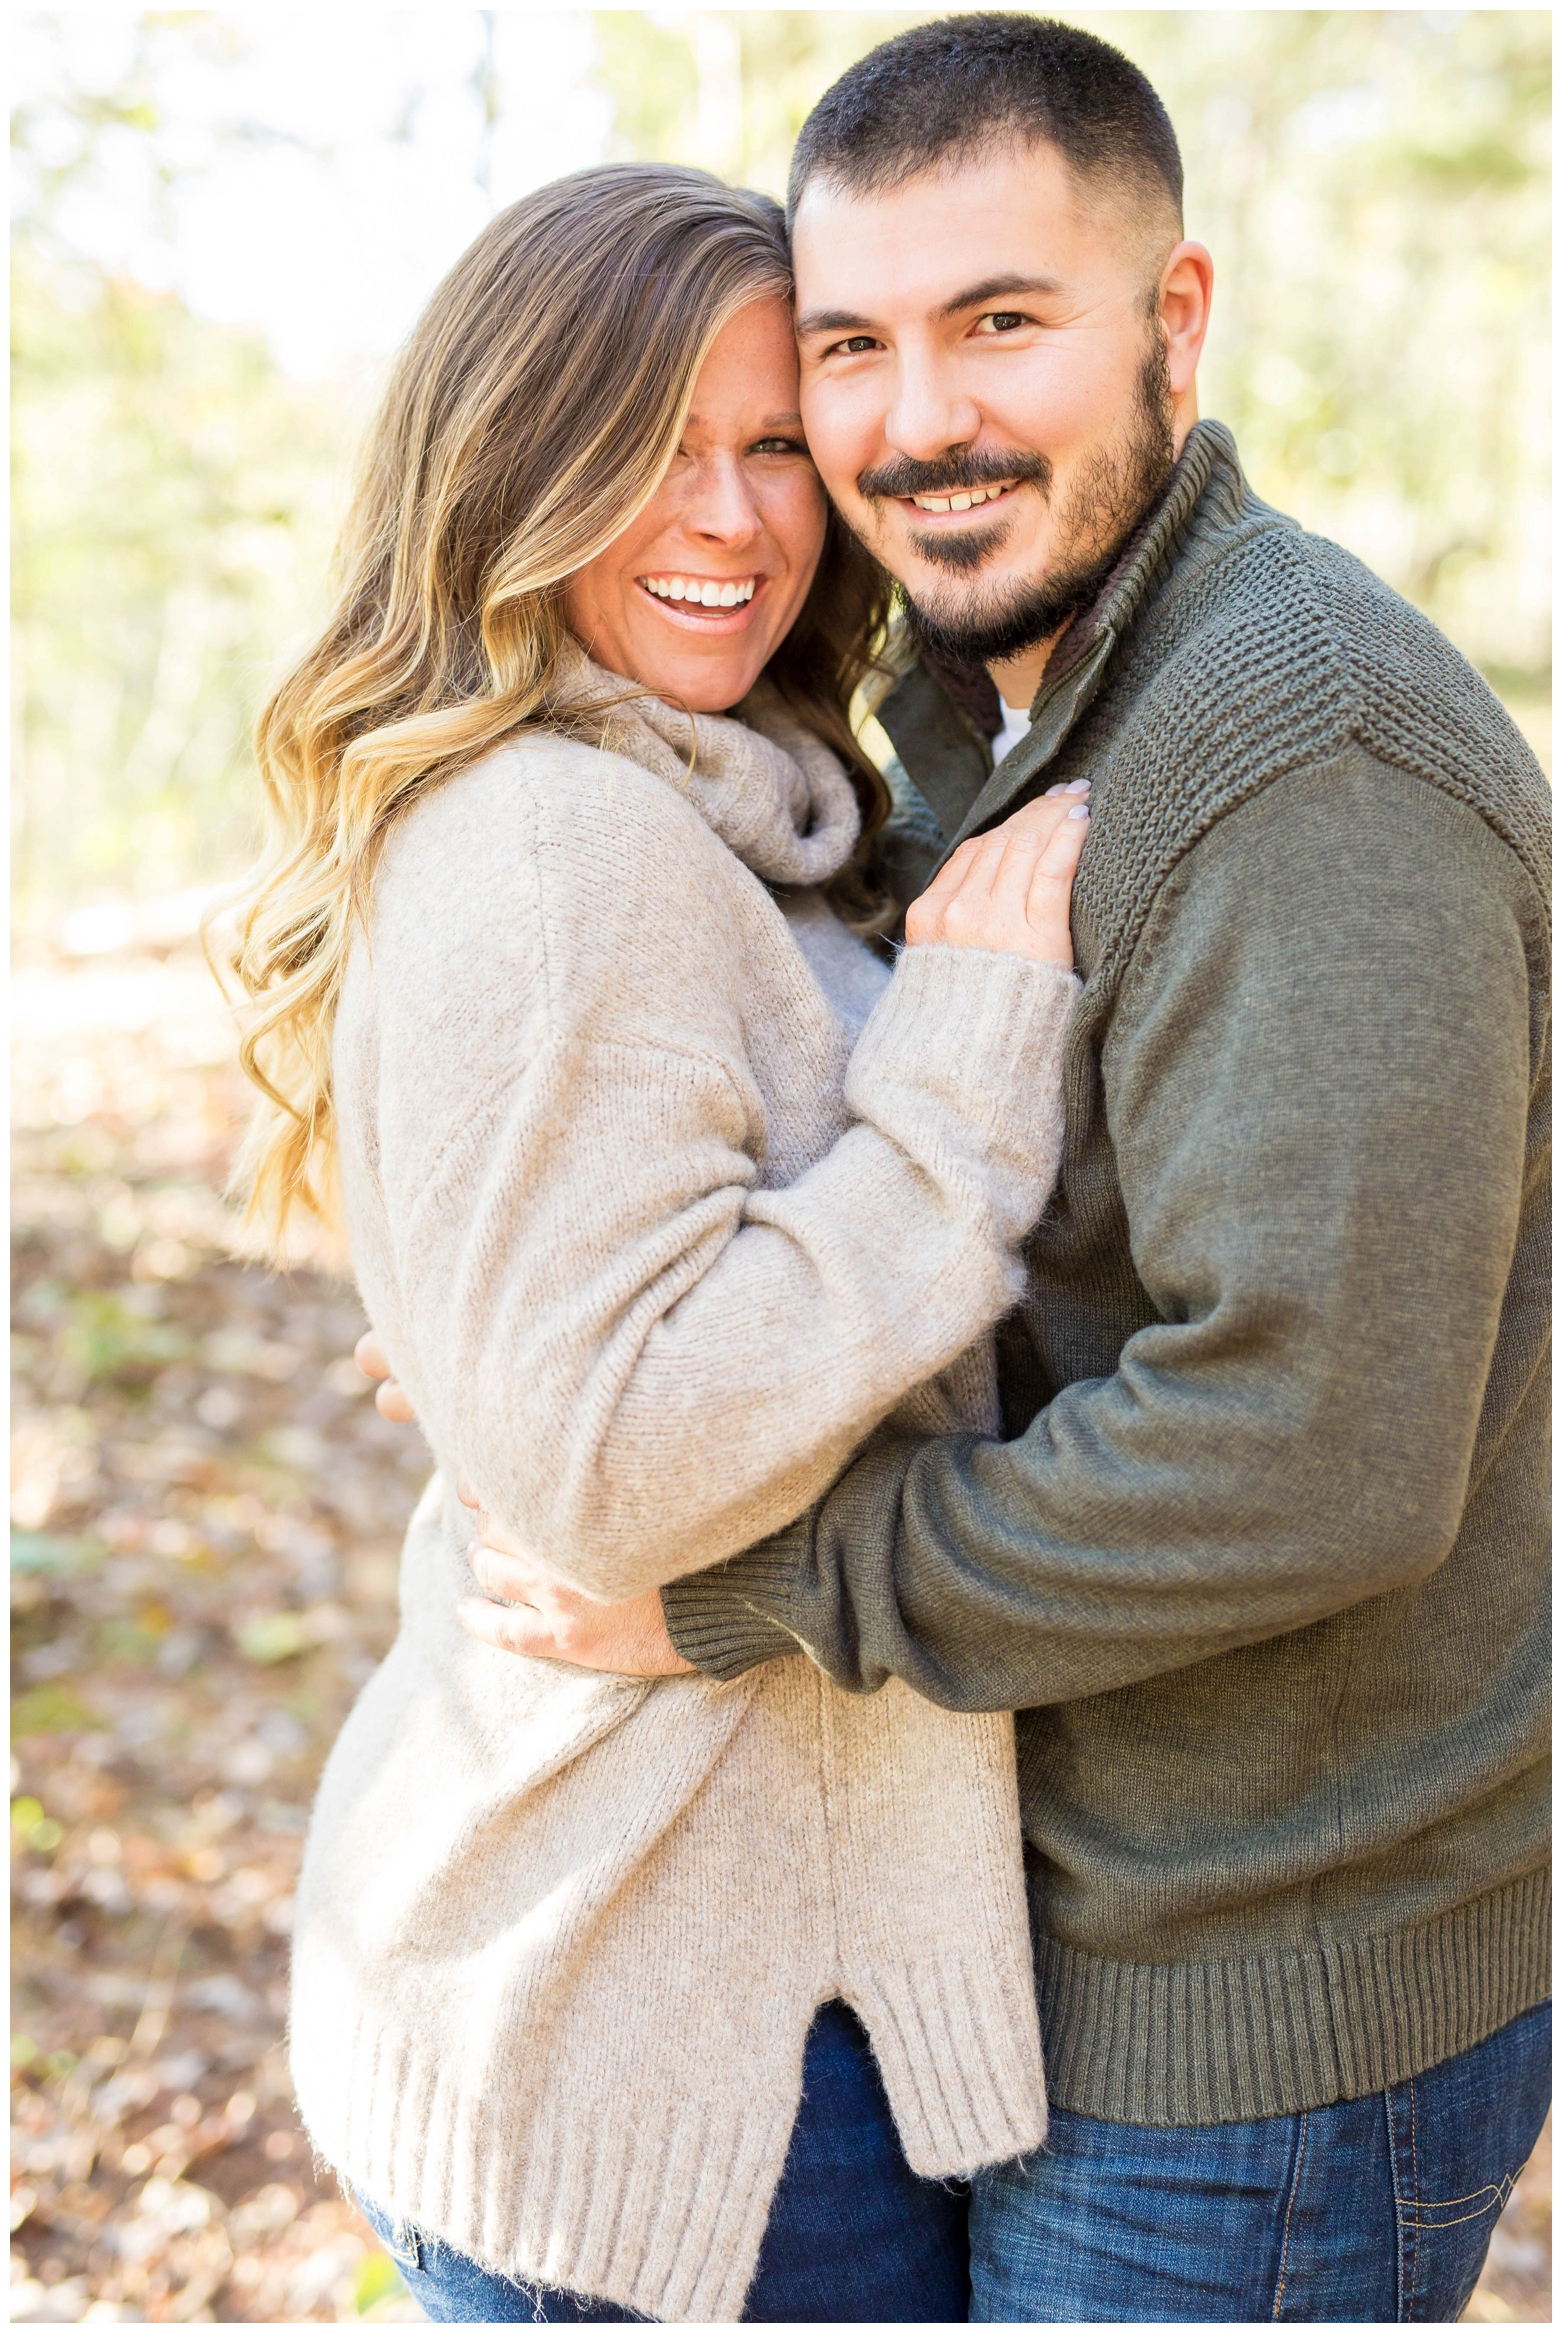 View More: http://hopetaylorphotographyphotos.pass.us/mackenzie-and-brian-engagement